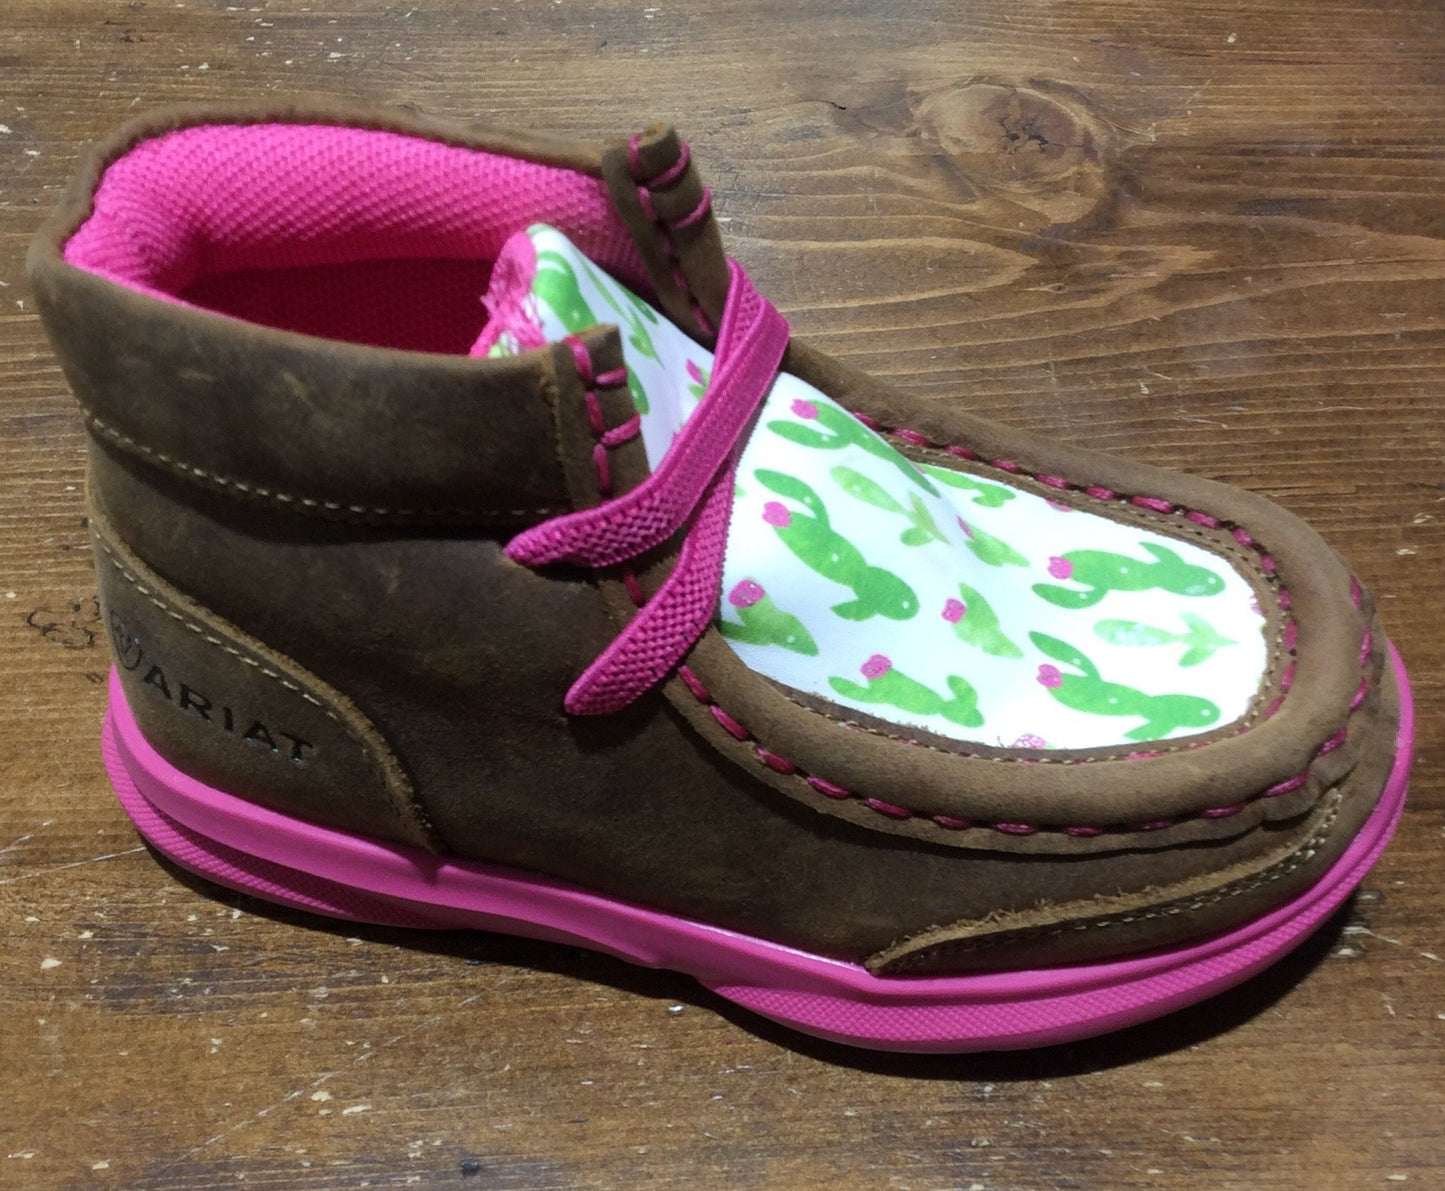 ARIAT LIL' STOMPERS "ANAHEIM" TODDLER GIRL'S SHOES